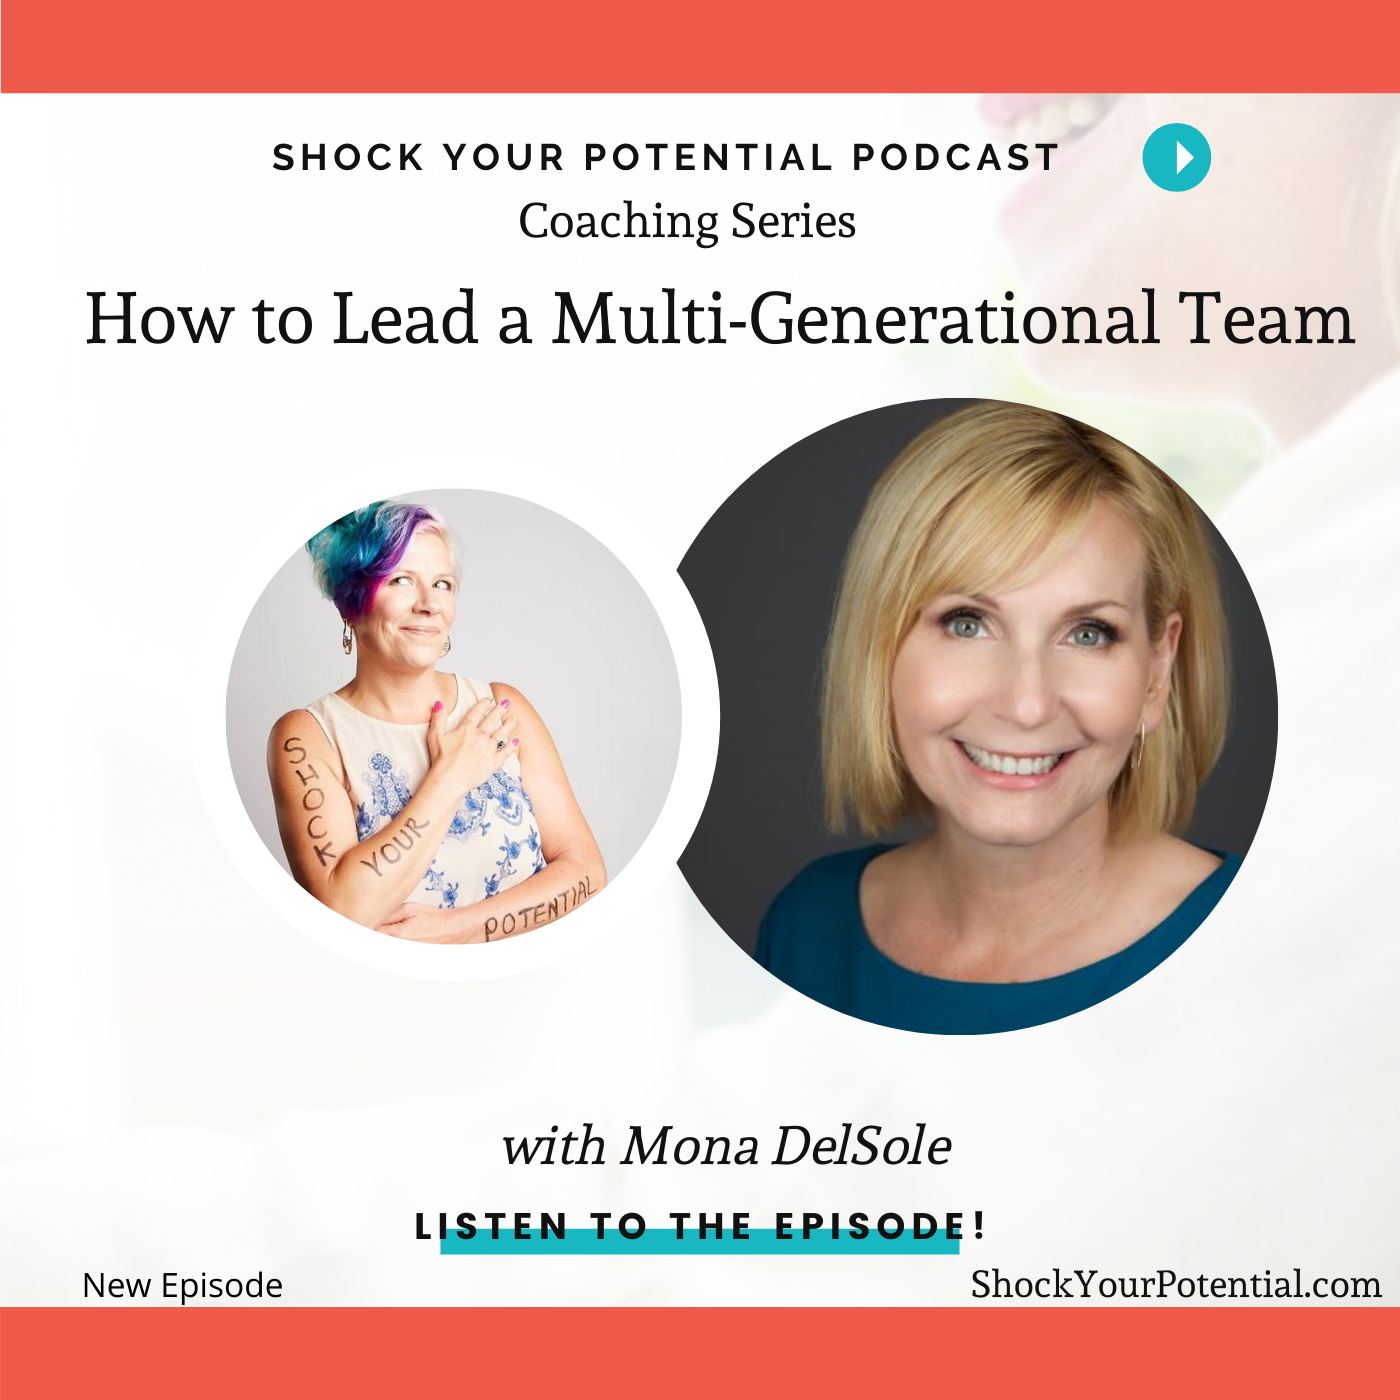 How to Lead a Mutli-Generational Team – Mona DelSole